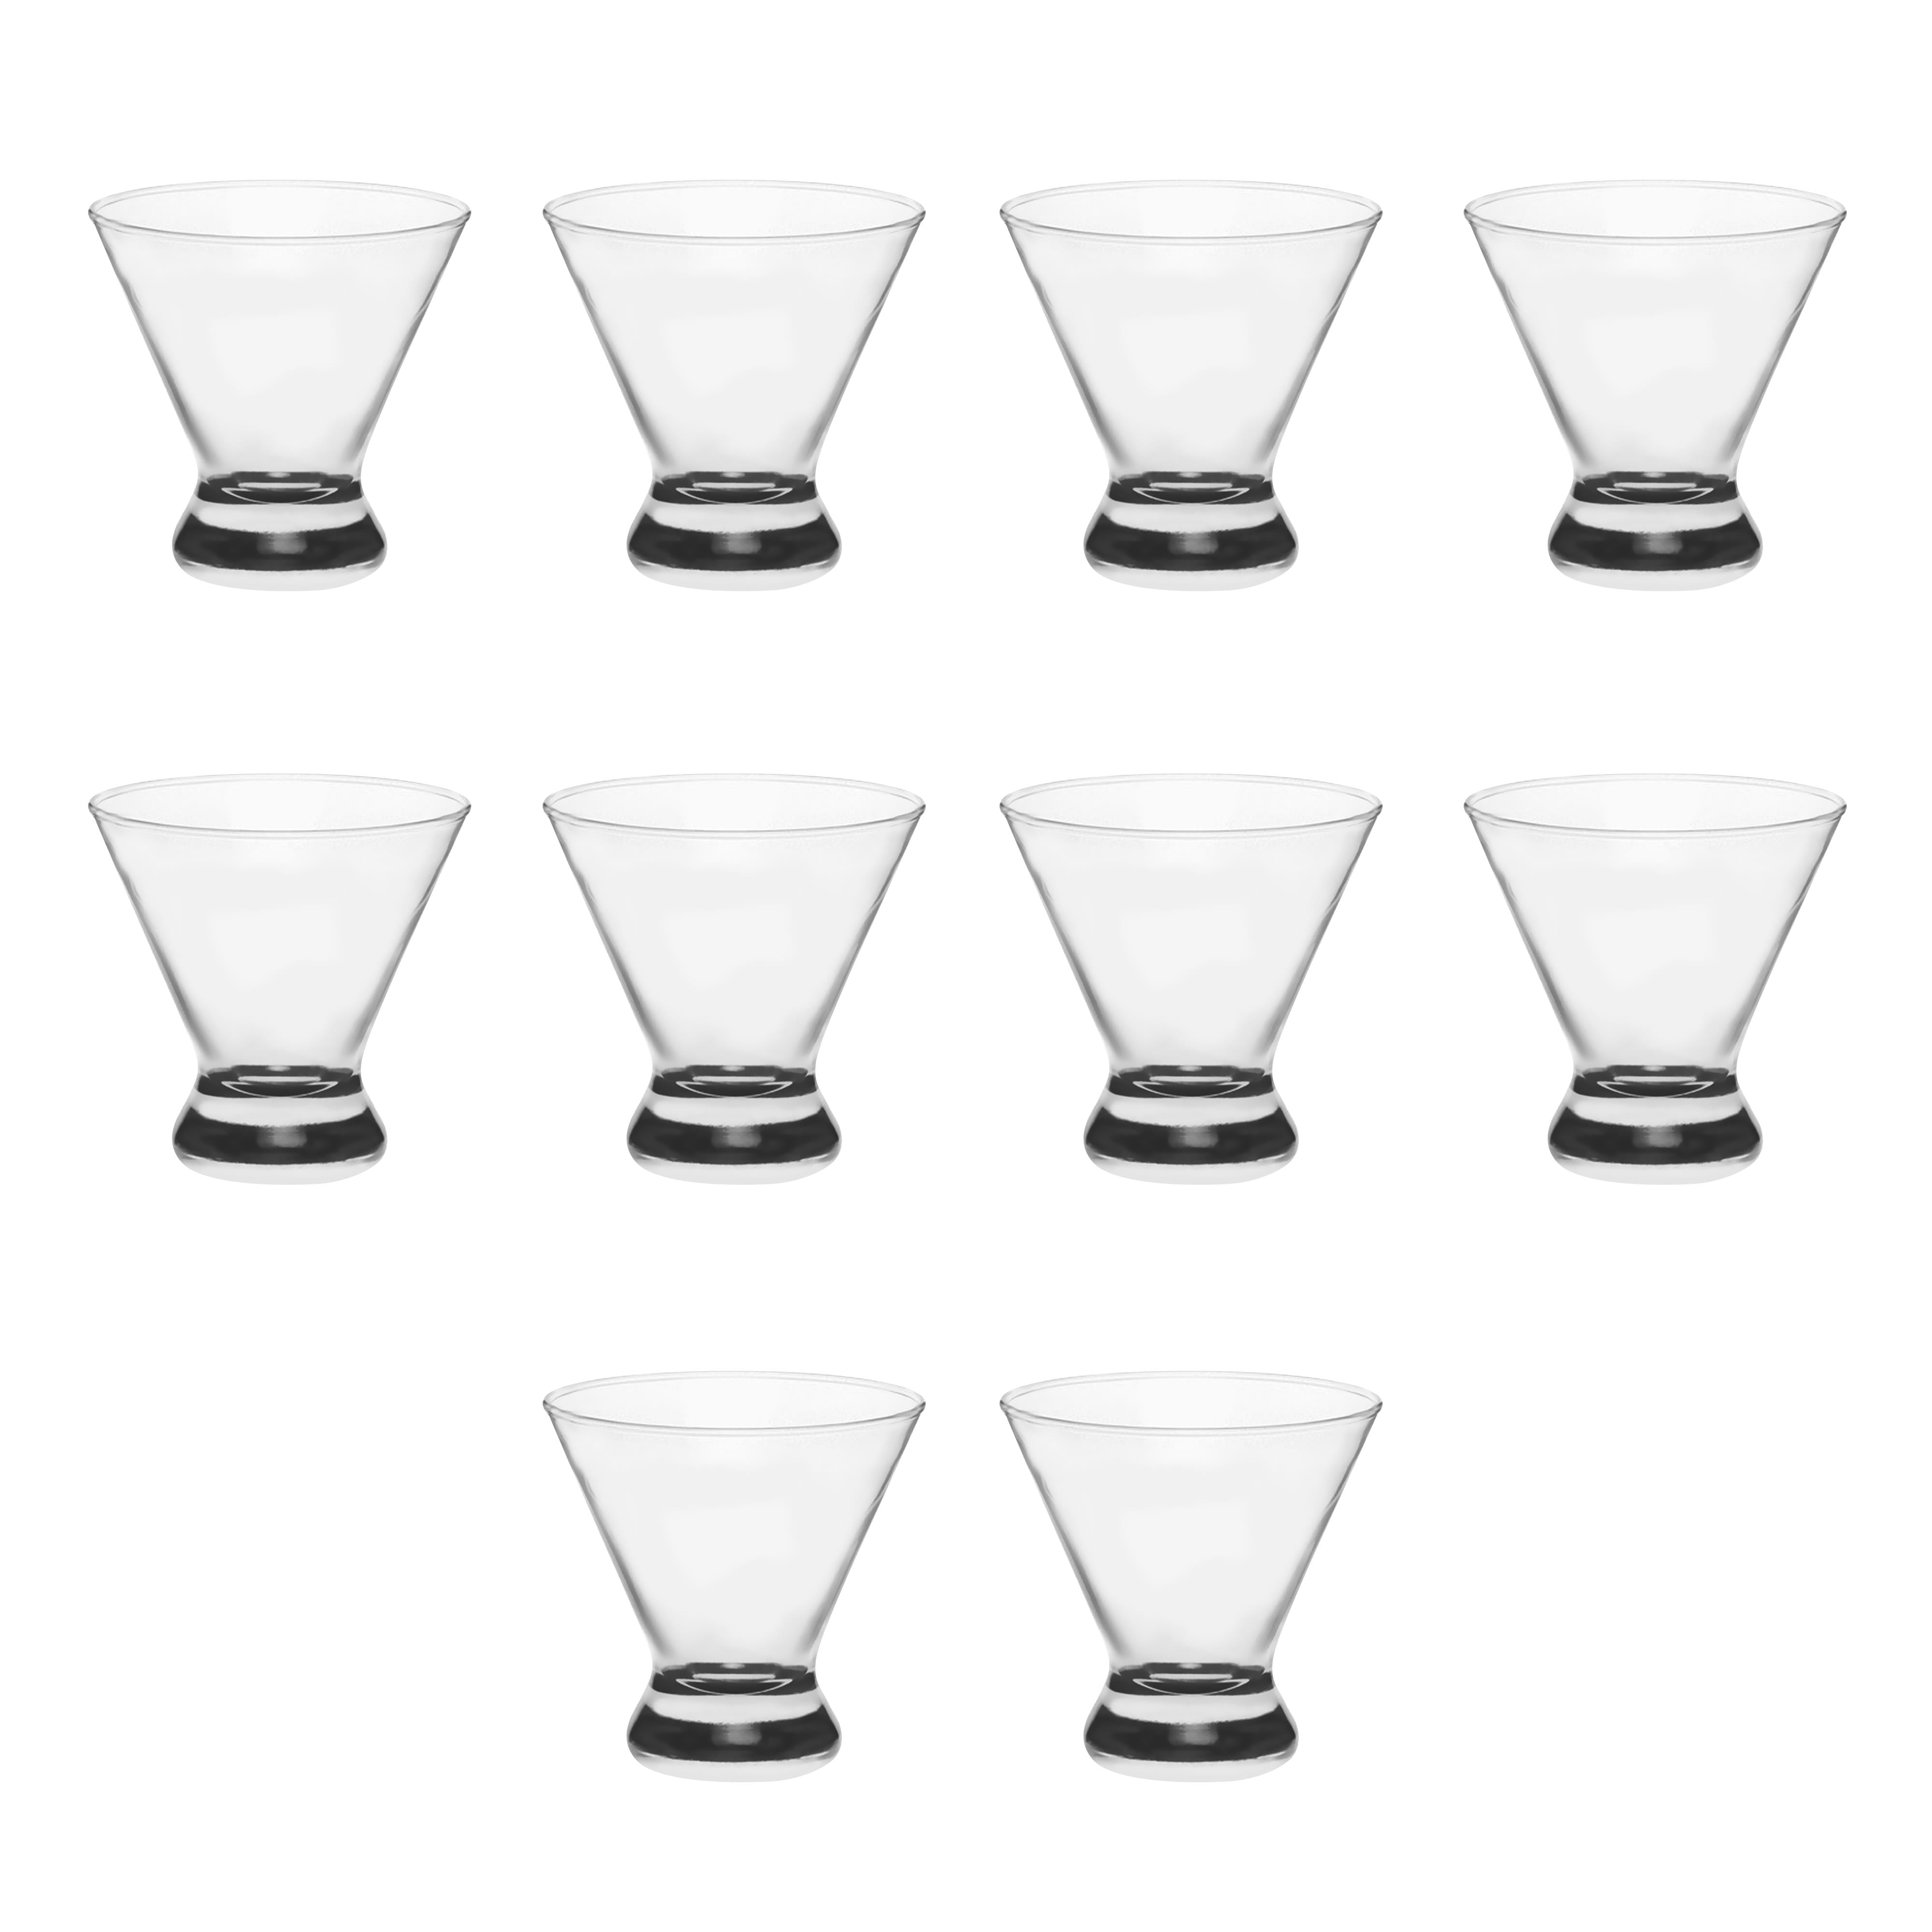 Libbey Martini Glasses 8.25 oz. Set of 10, Bulk Pack - Great for Cocktails,  Wedding Favors, Party Favors, Events - Red 